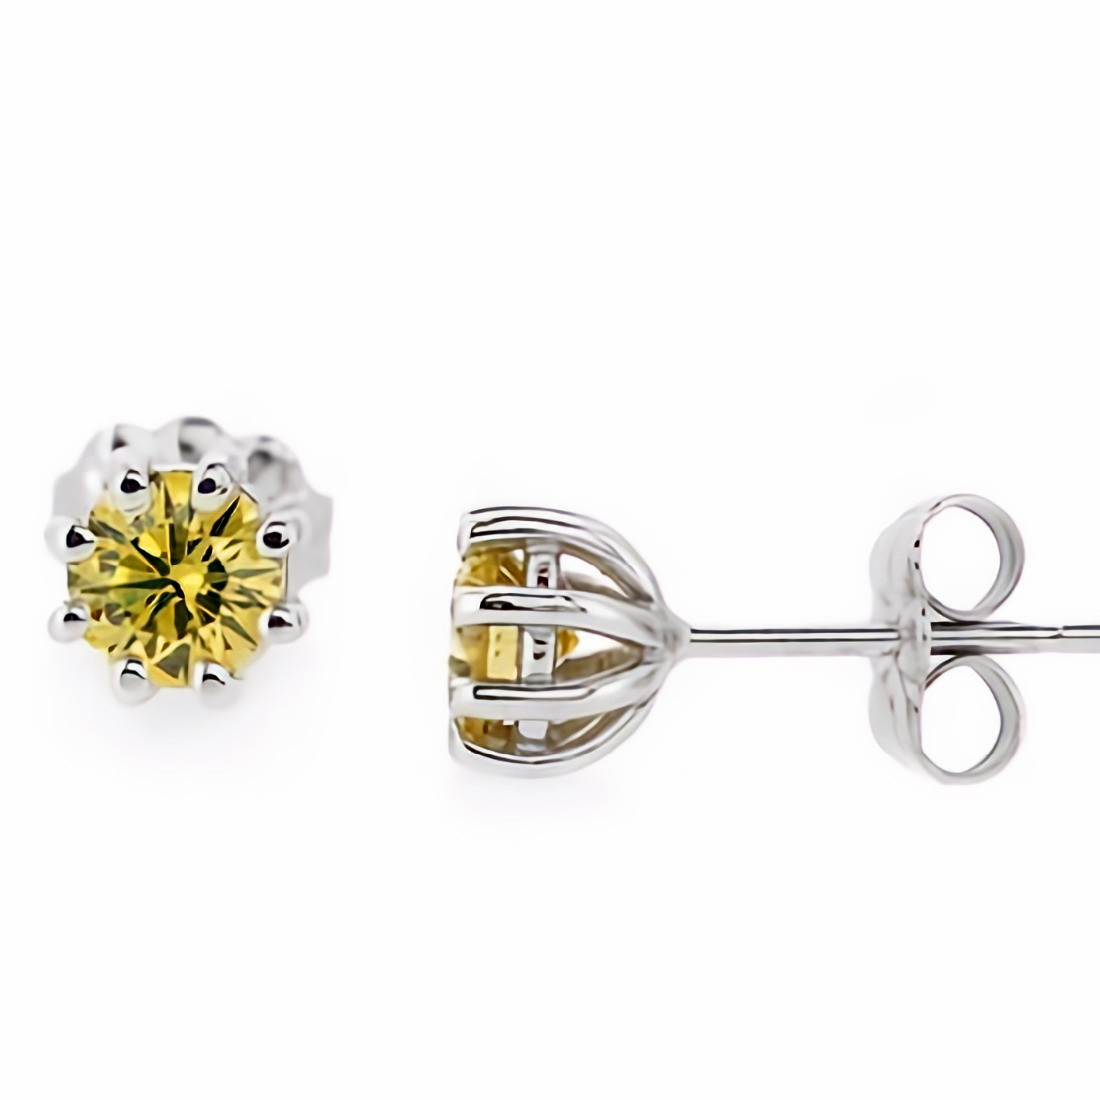 Aggregate more than 185 mens canary yellow diamond earrings latest